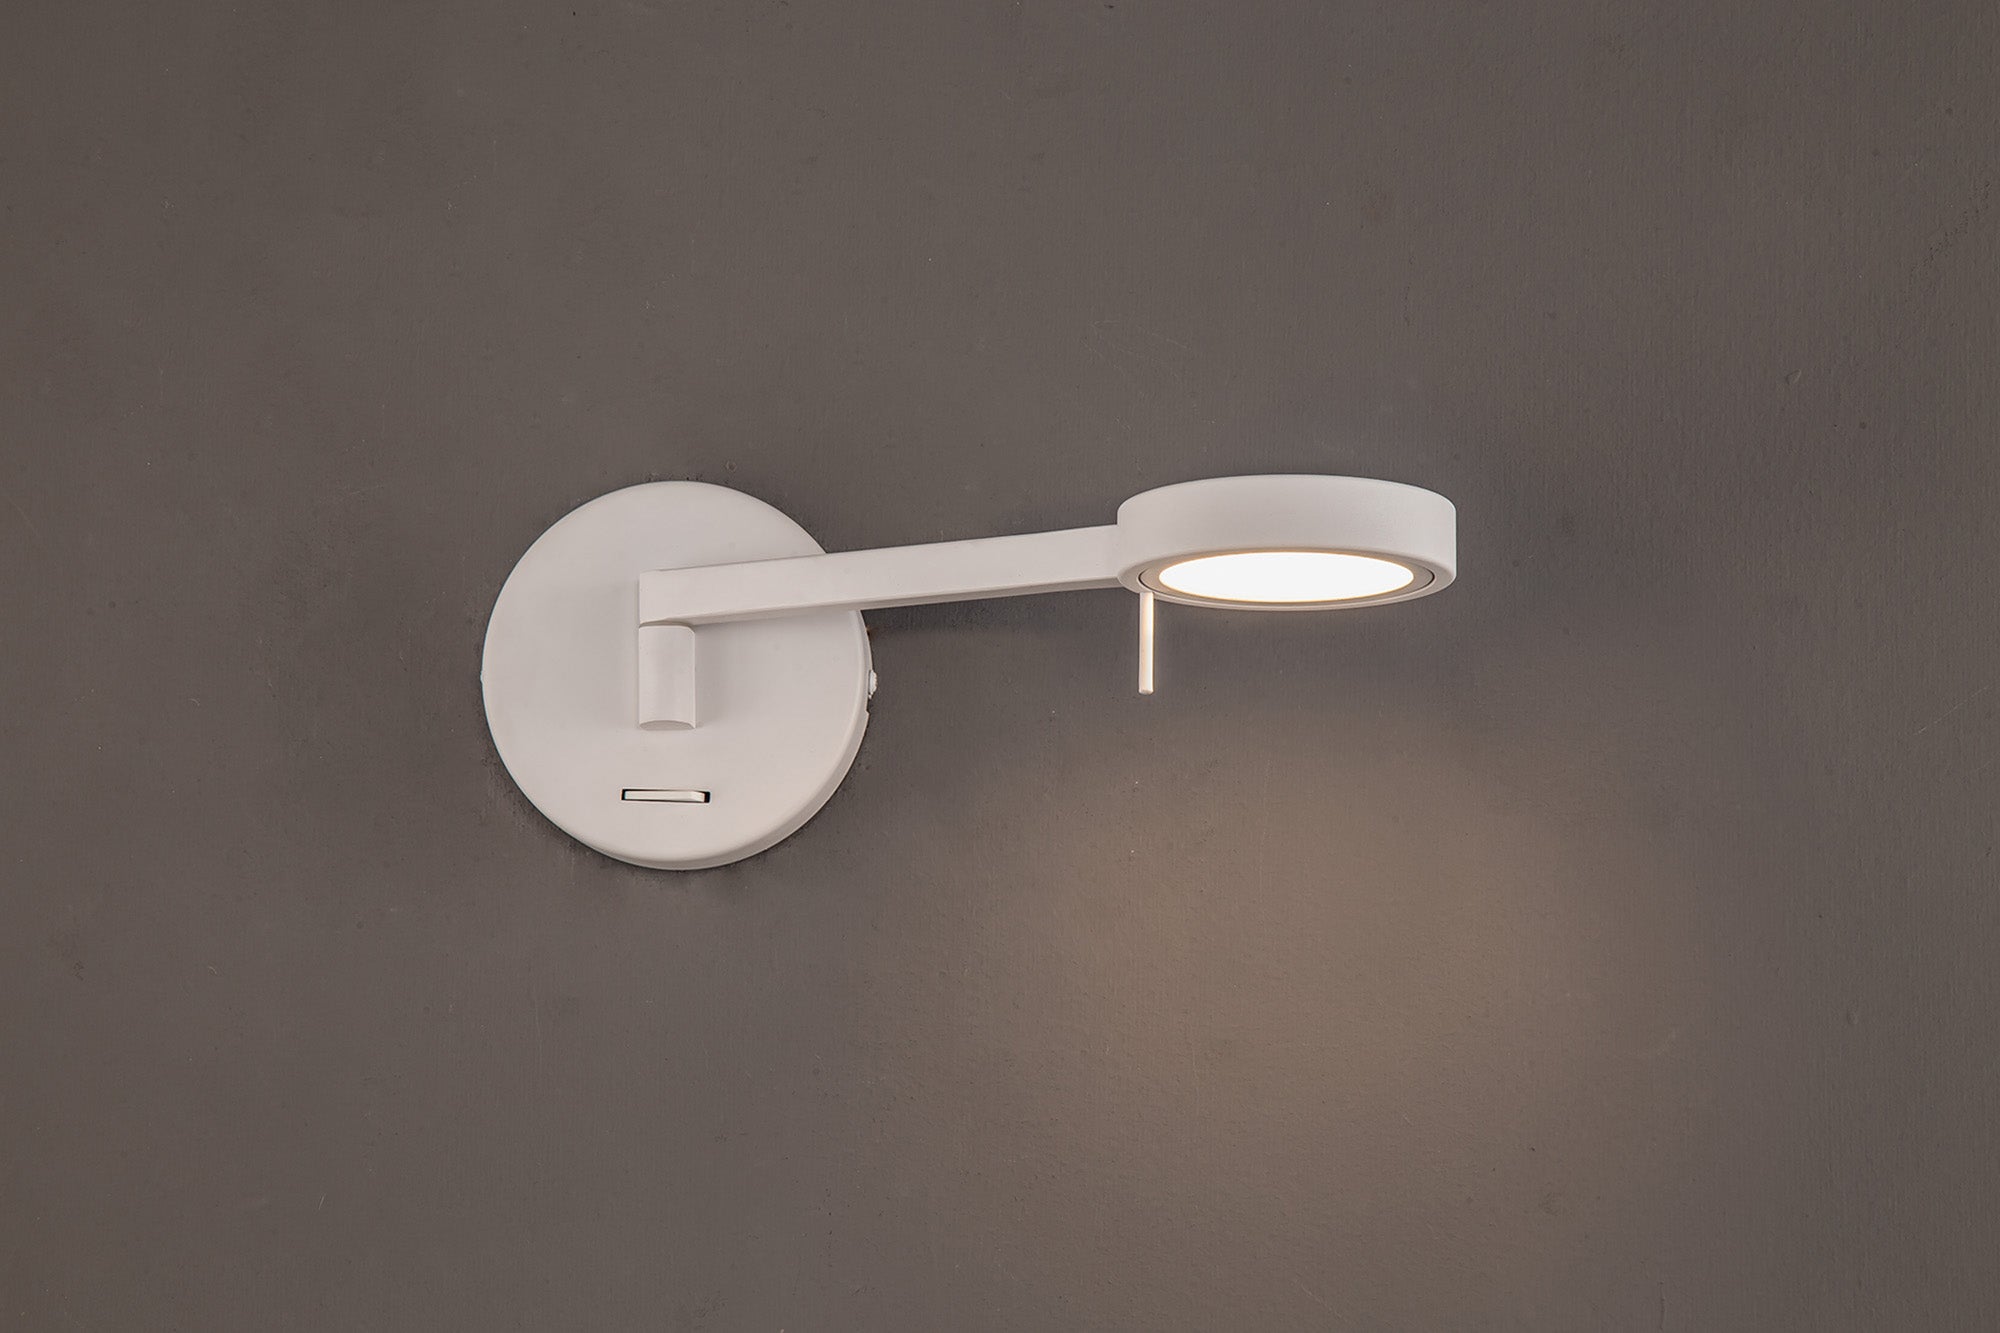 Burley Switched Adjustable Wall Lamp / Reader, 1 x 8W LED, 3000K, Sand White, 3yrs Warranty